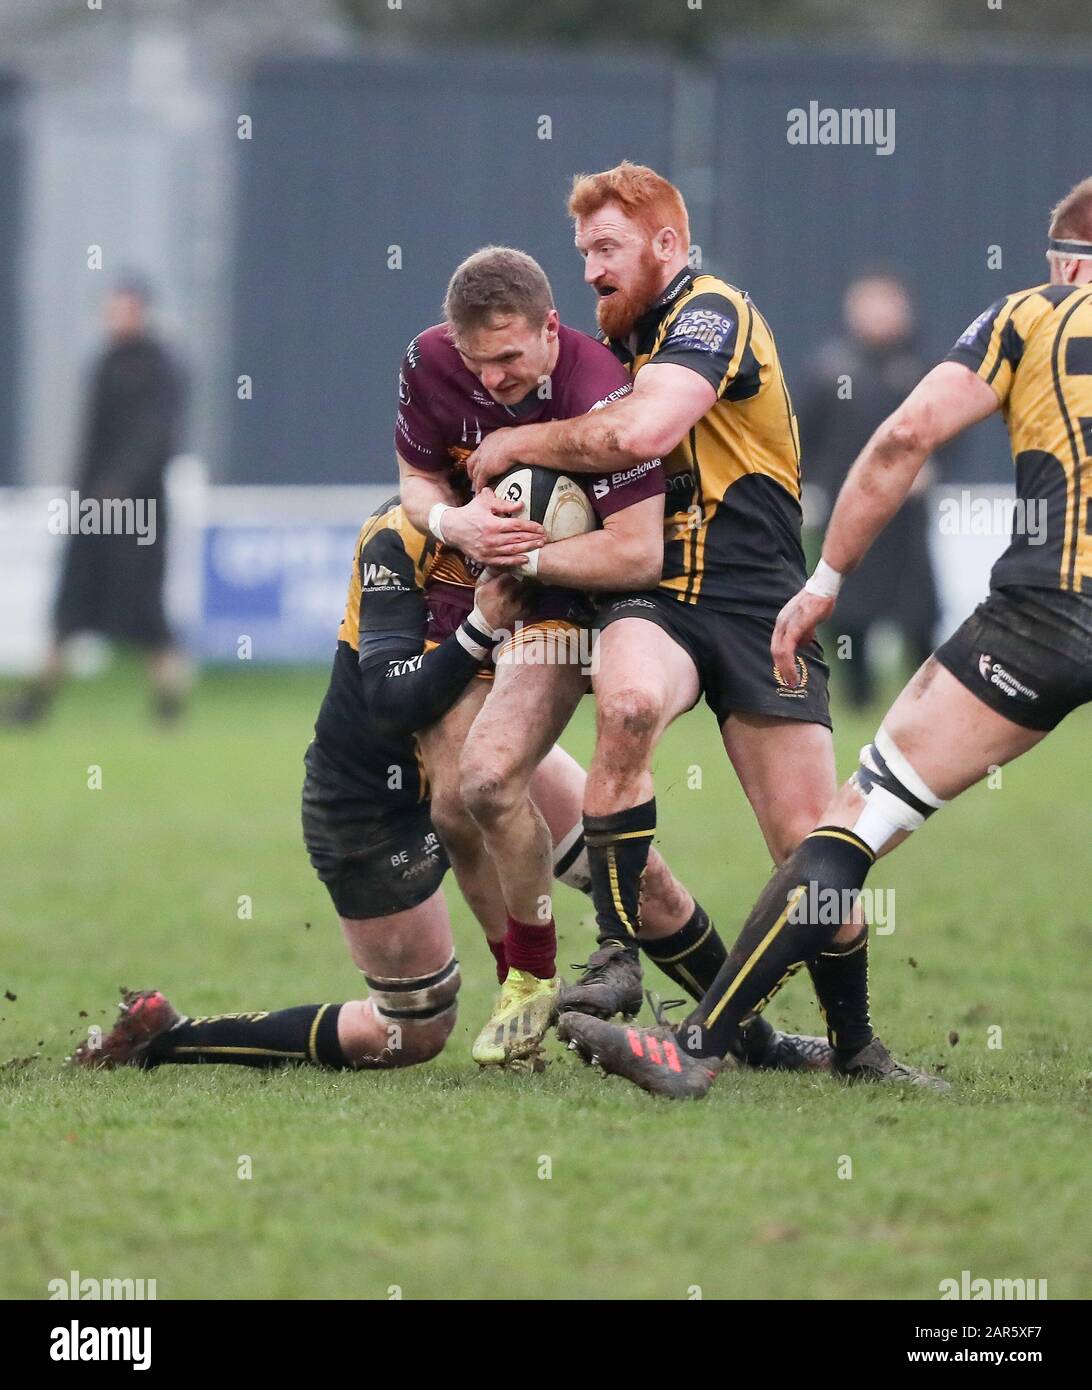 25.01.2020, Hinckley, Leicester, England. Rugby Union, Hinckley rfc v Sedgley Park rfc.   Oli Glasse on the charge Sedgley Park during the RFU National League 2 North (NL2N) game played at the Leicester  Road Stadium. Stock Photo